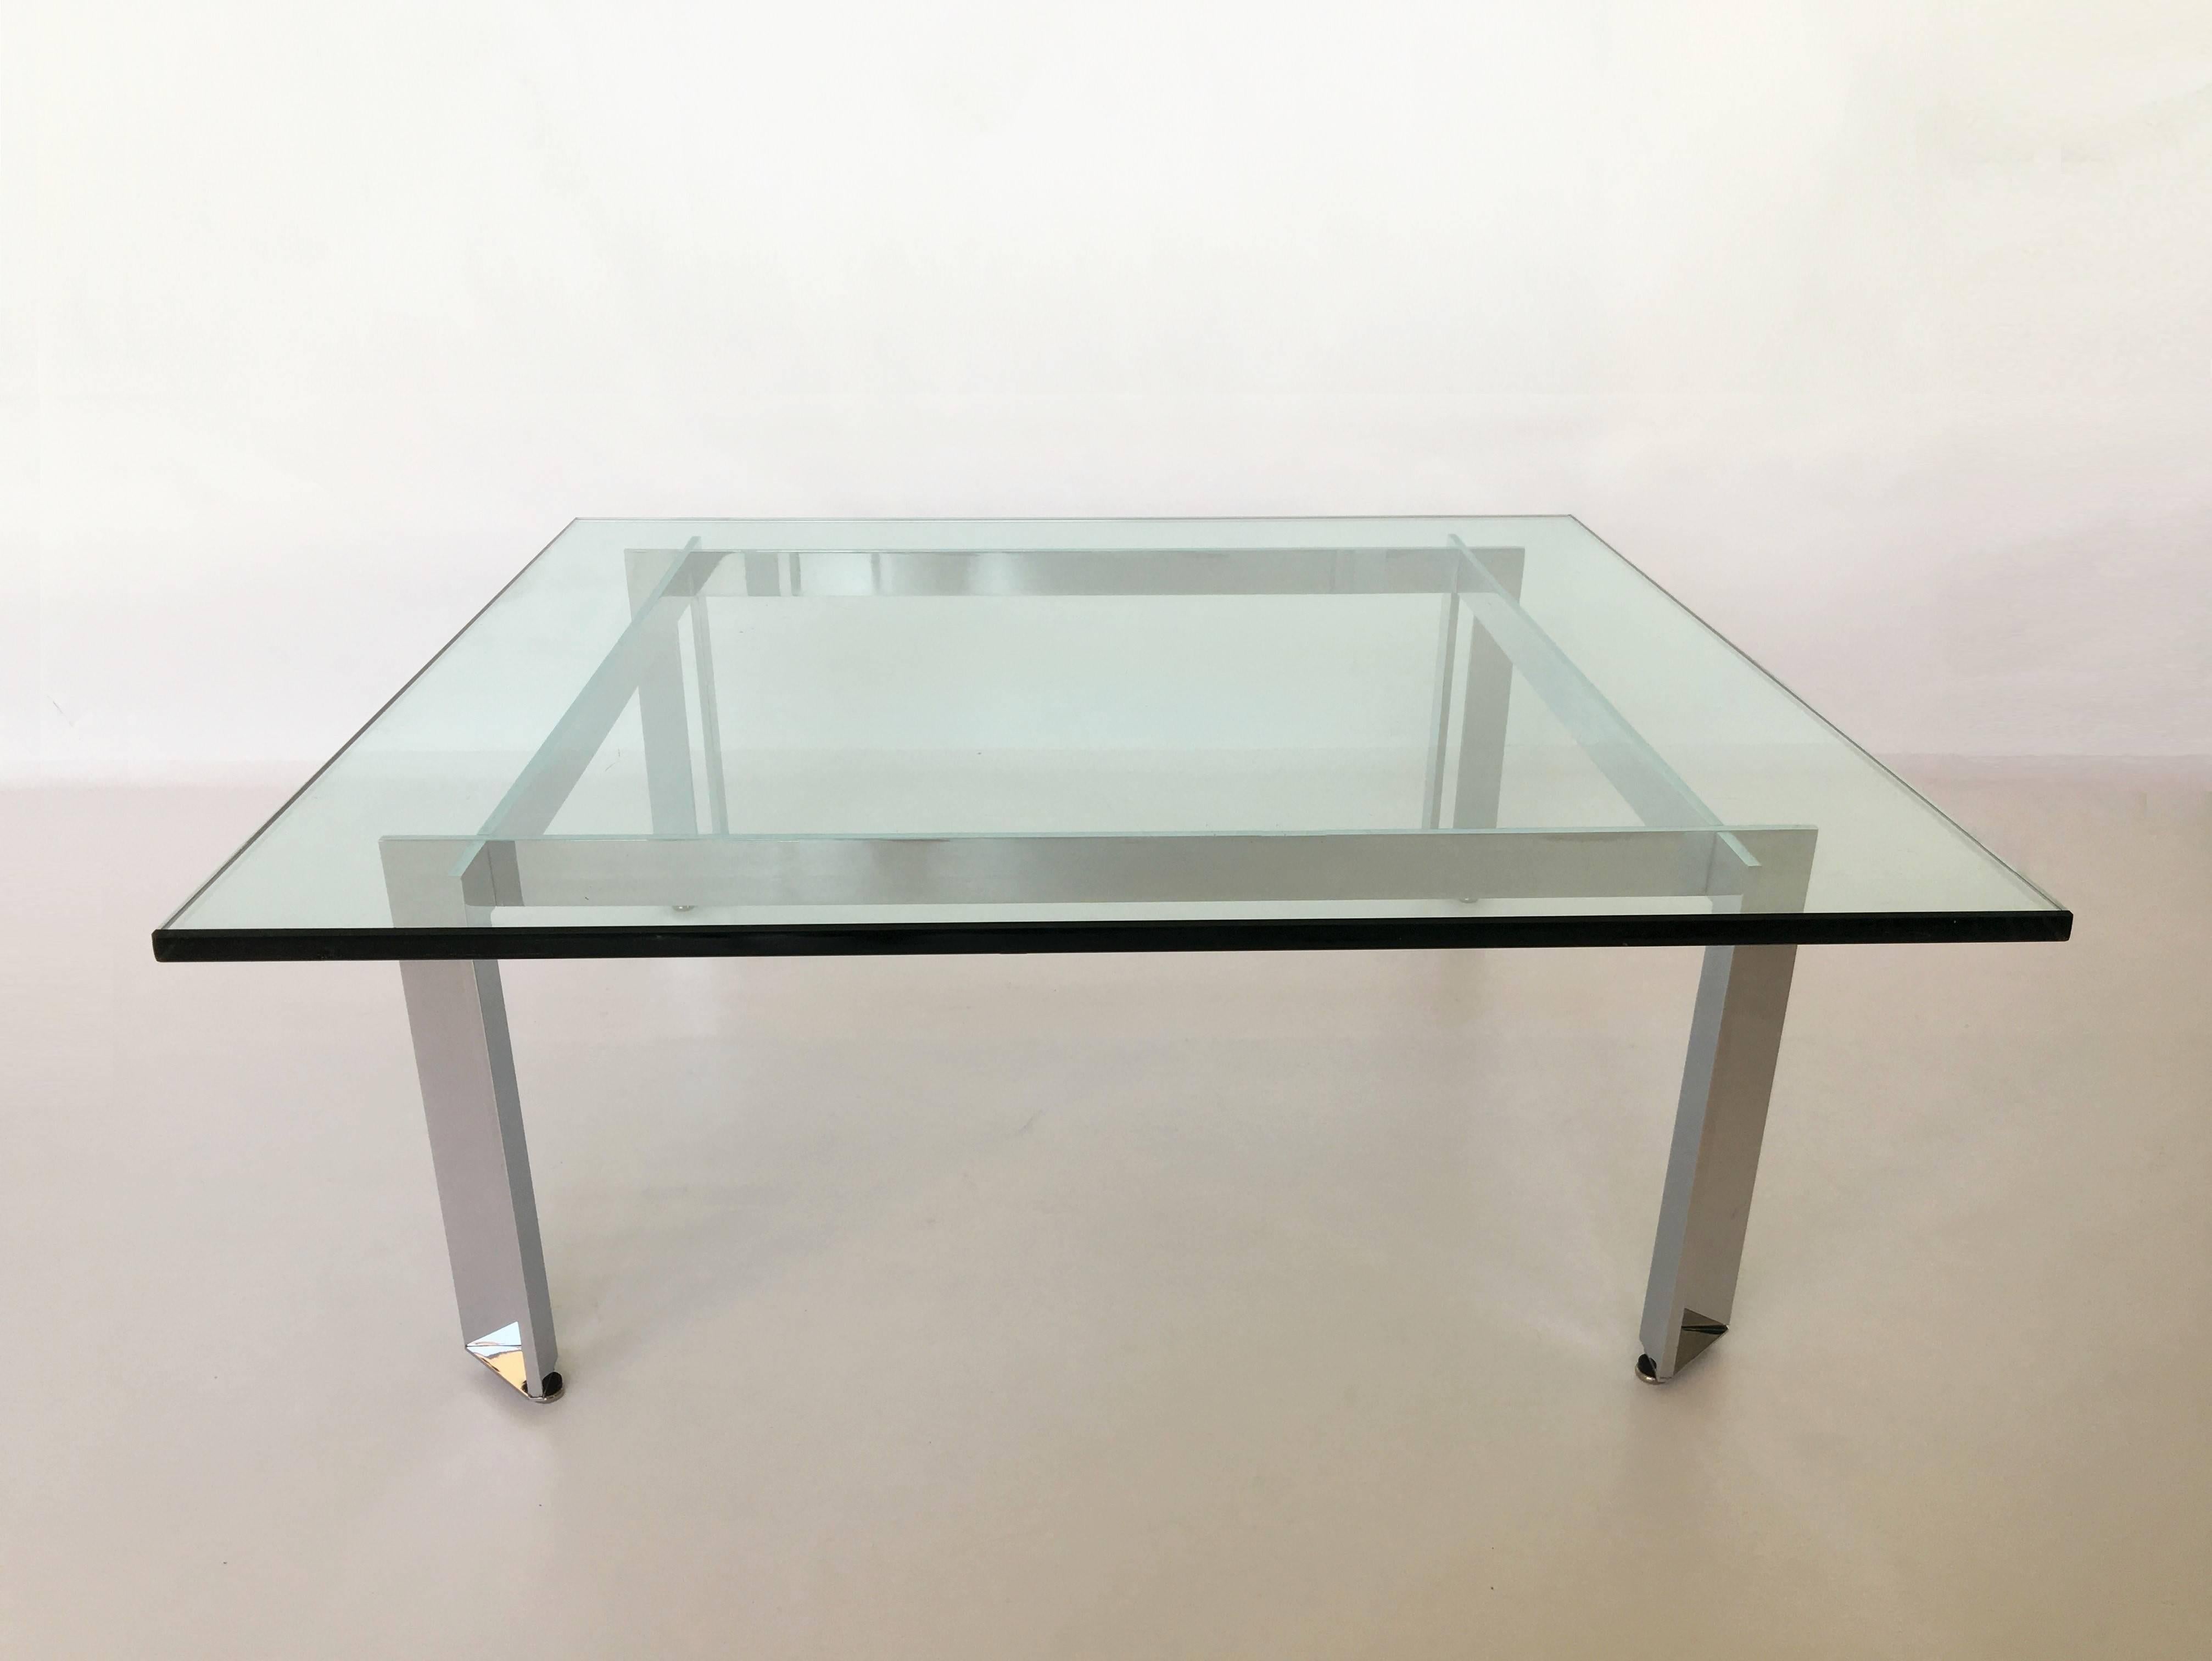 Architecturally inspired square coffee or cocktail table of chromed steel base with glass top.